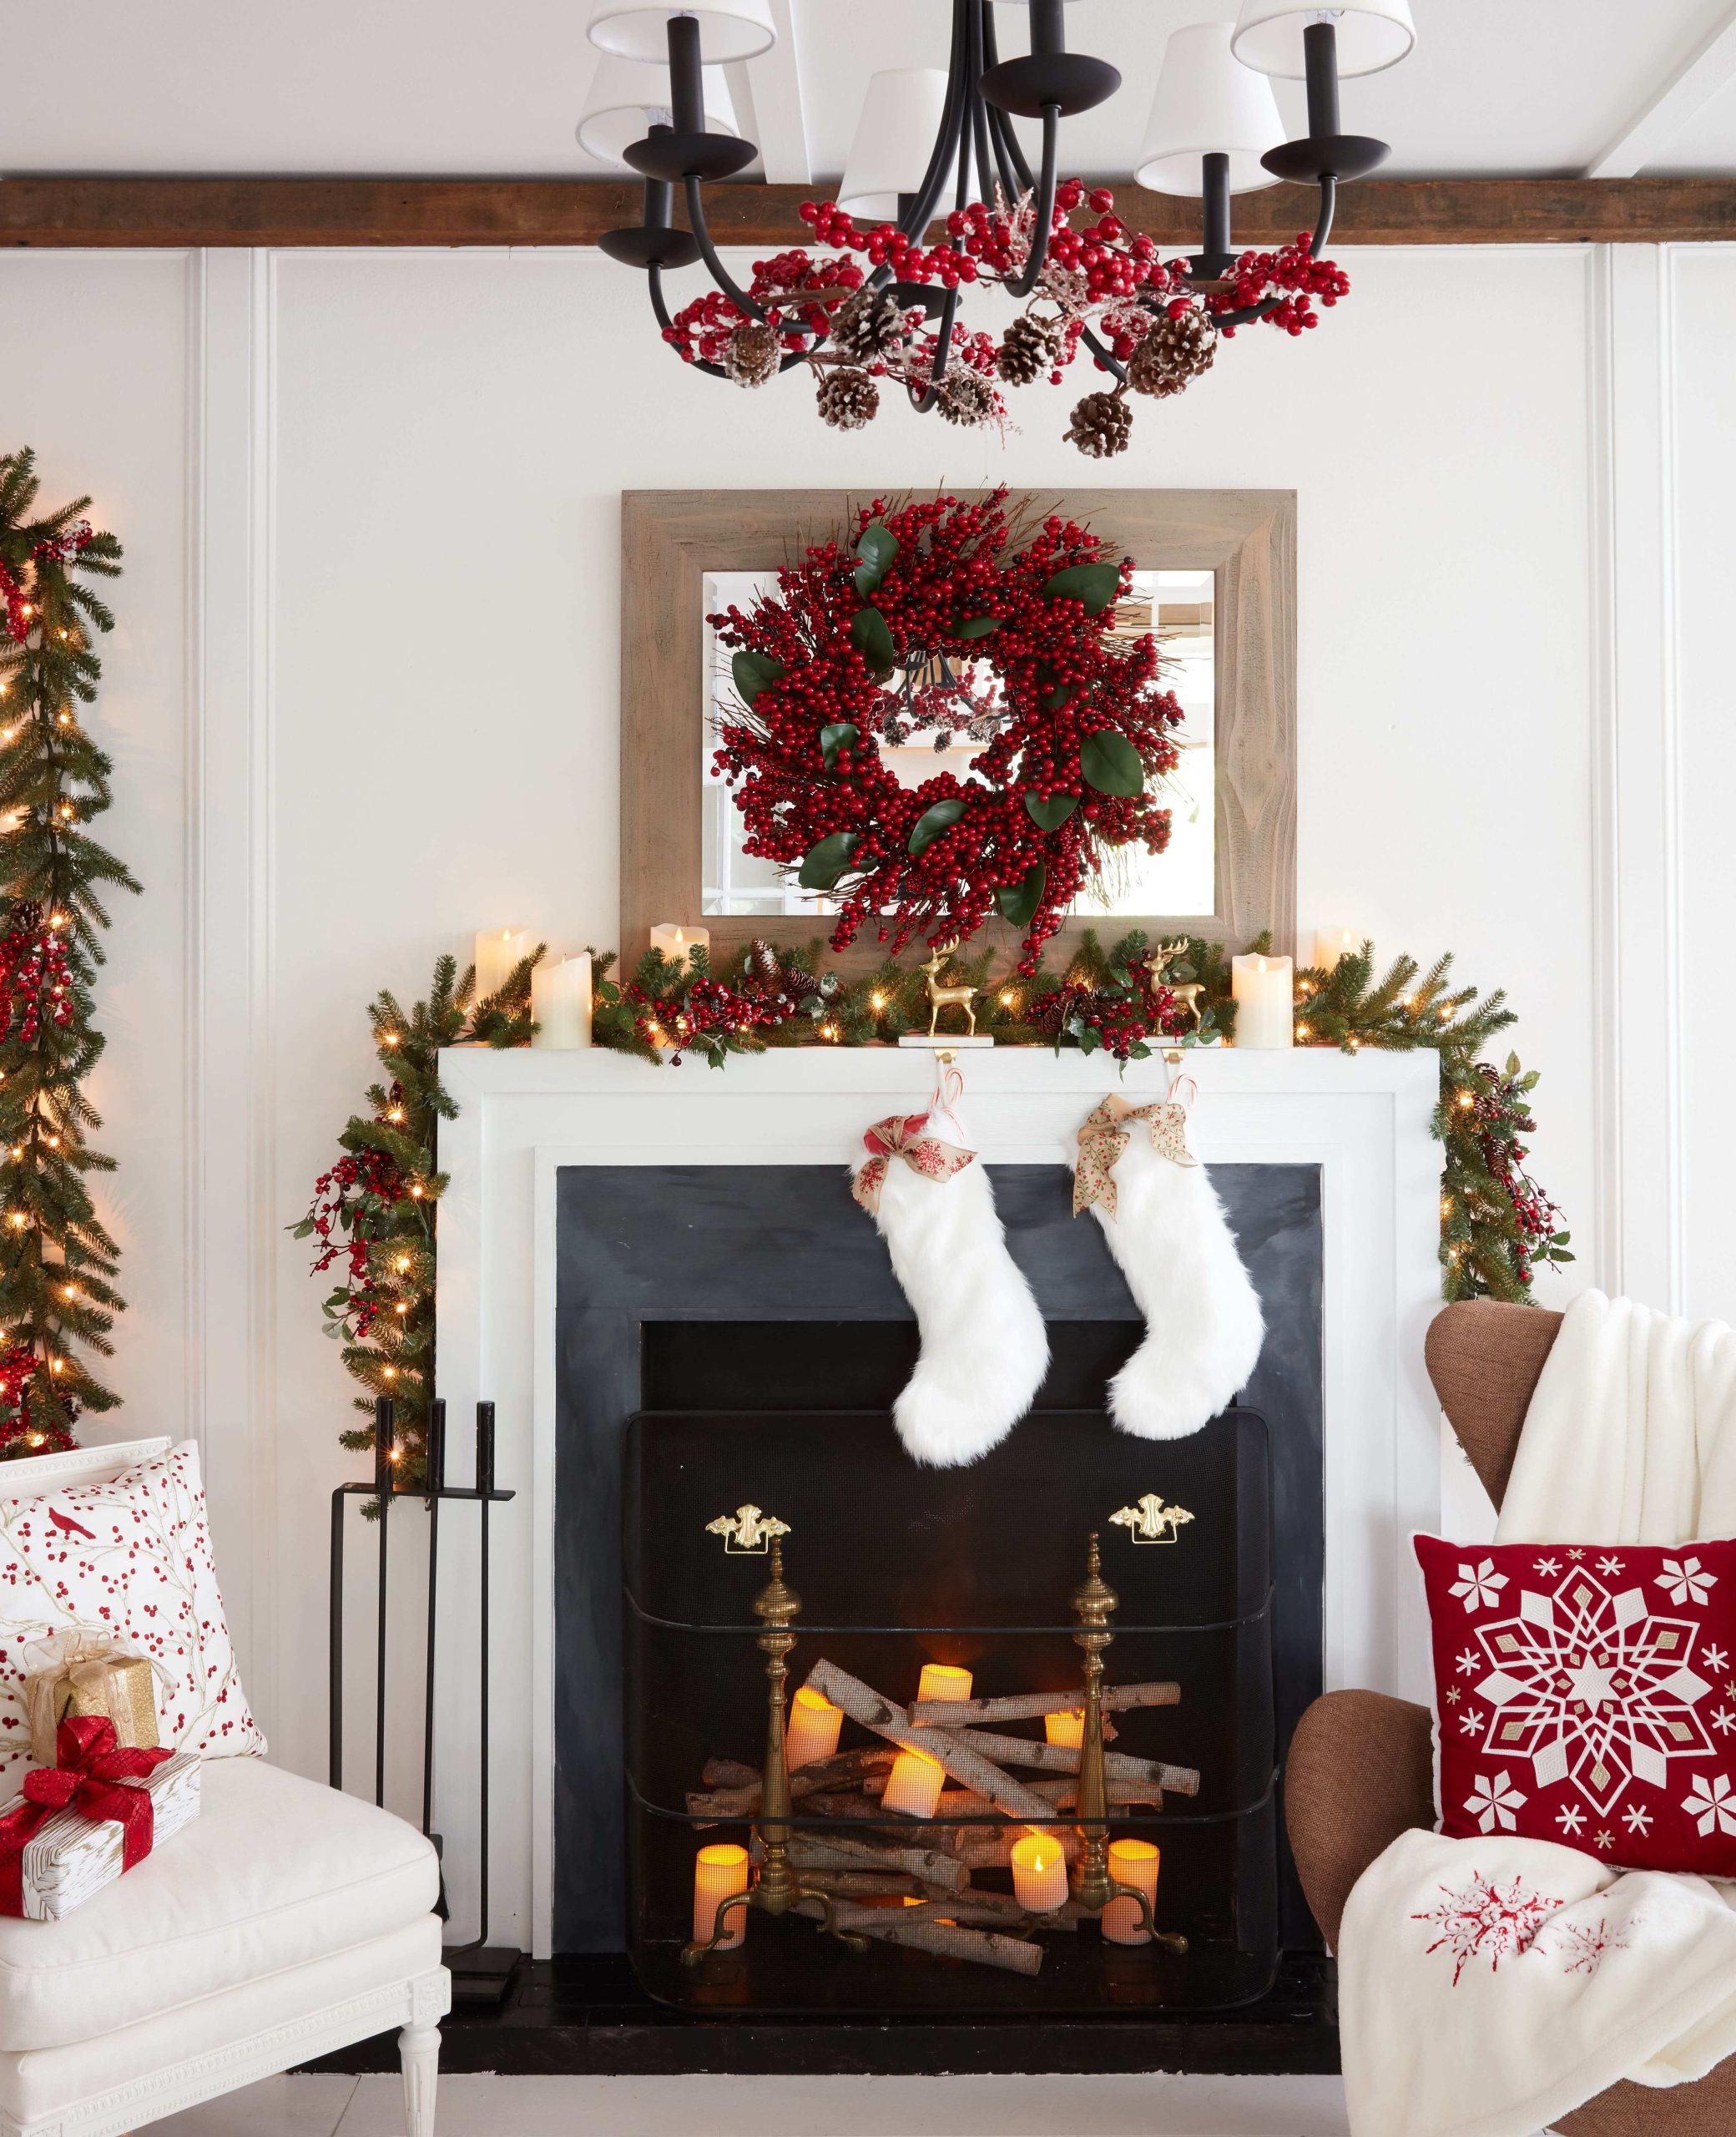 Living room set decorated for Christmas with stockings hanging over a faux fireplace